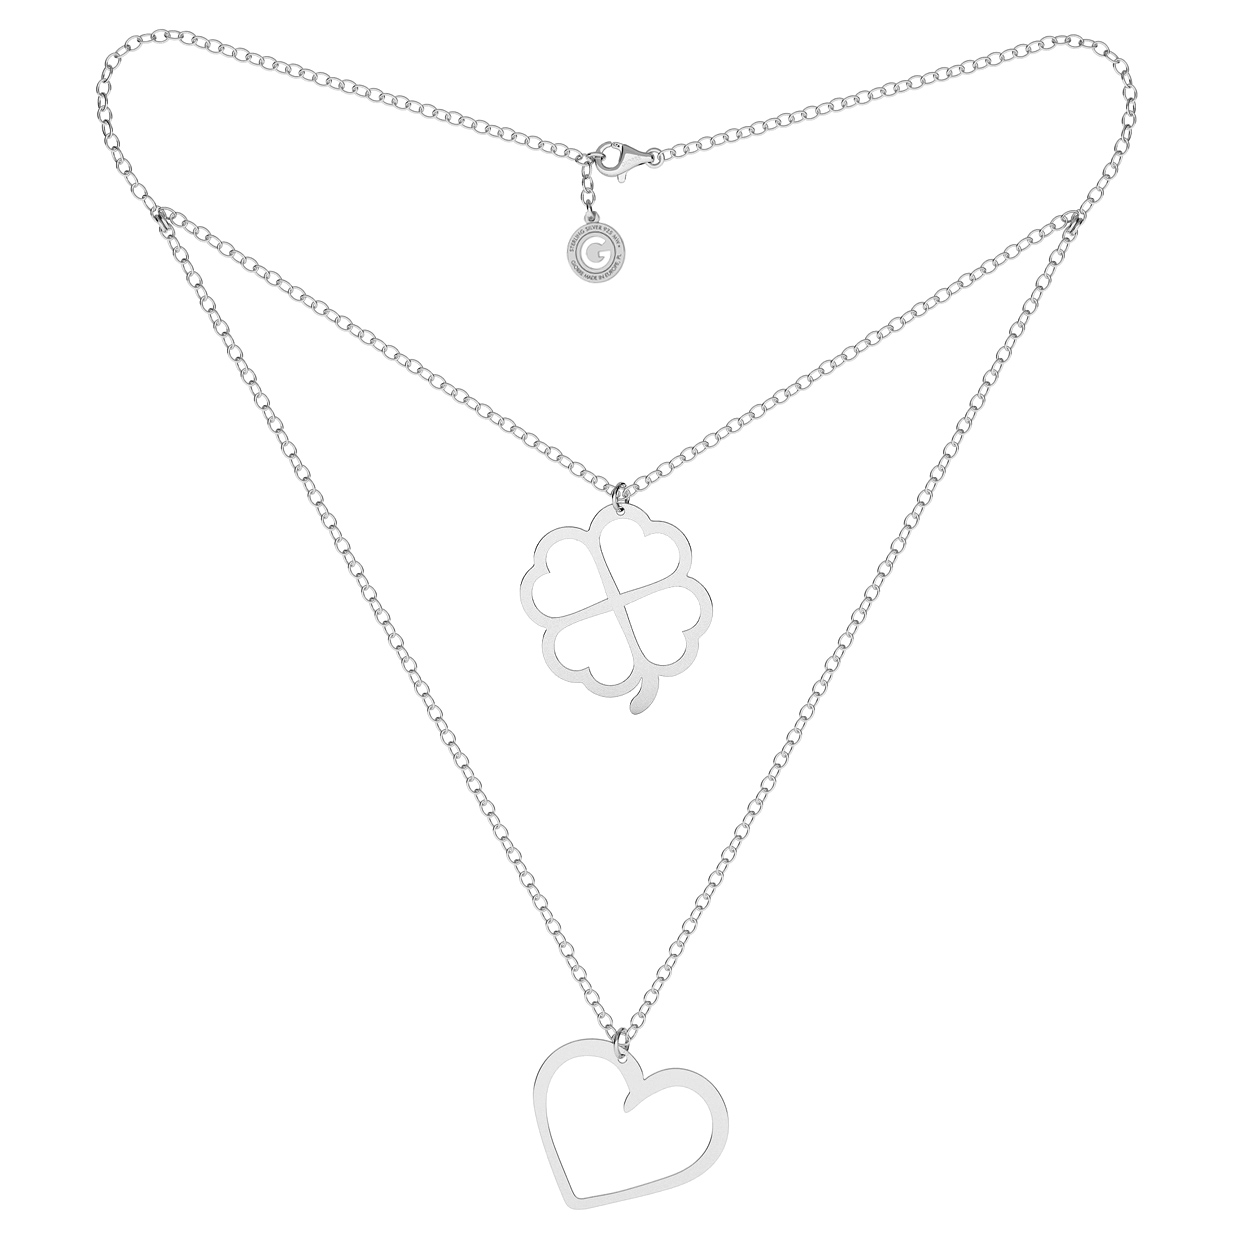 HEART AND FLOWER NECKLACE SILVER 925